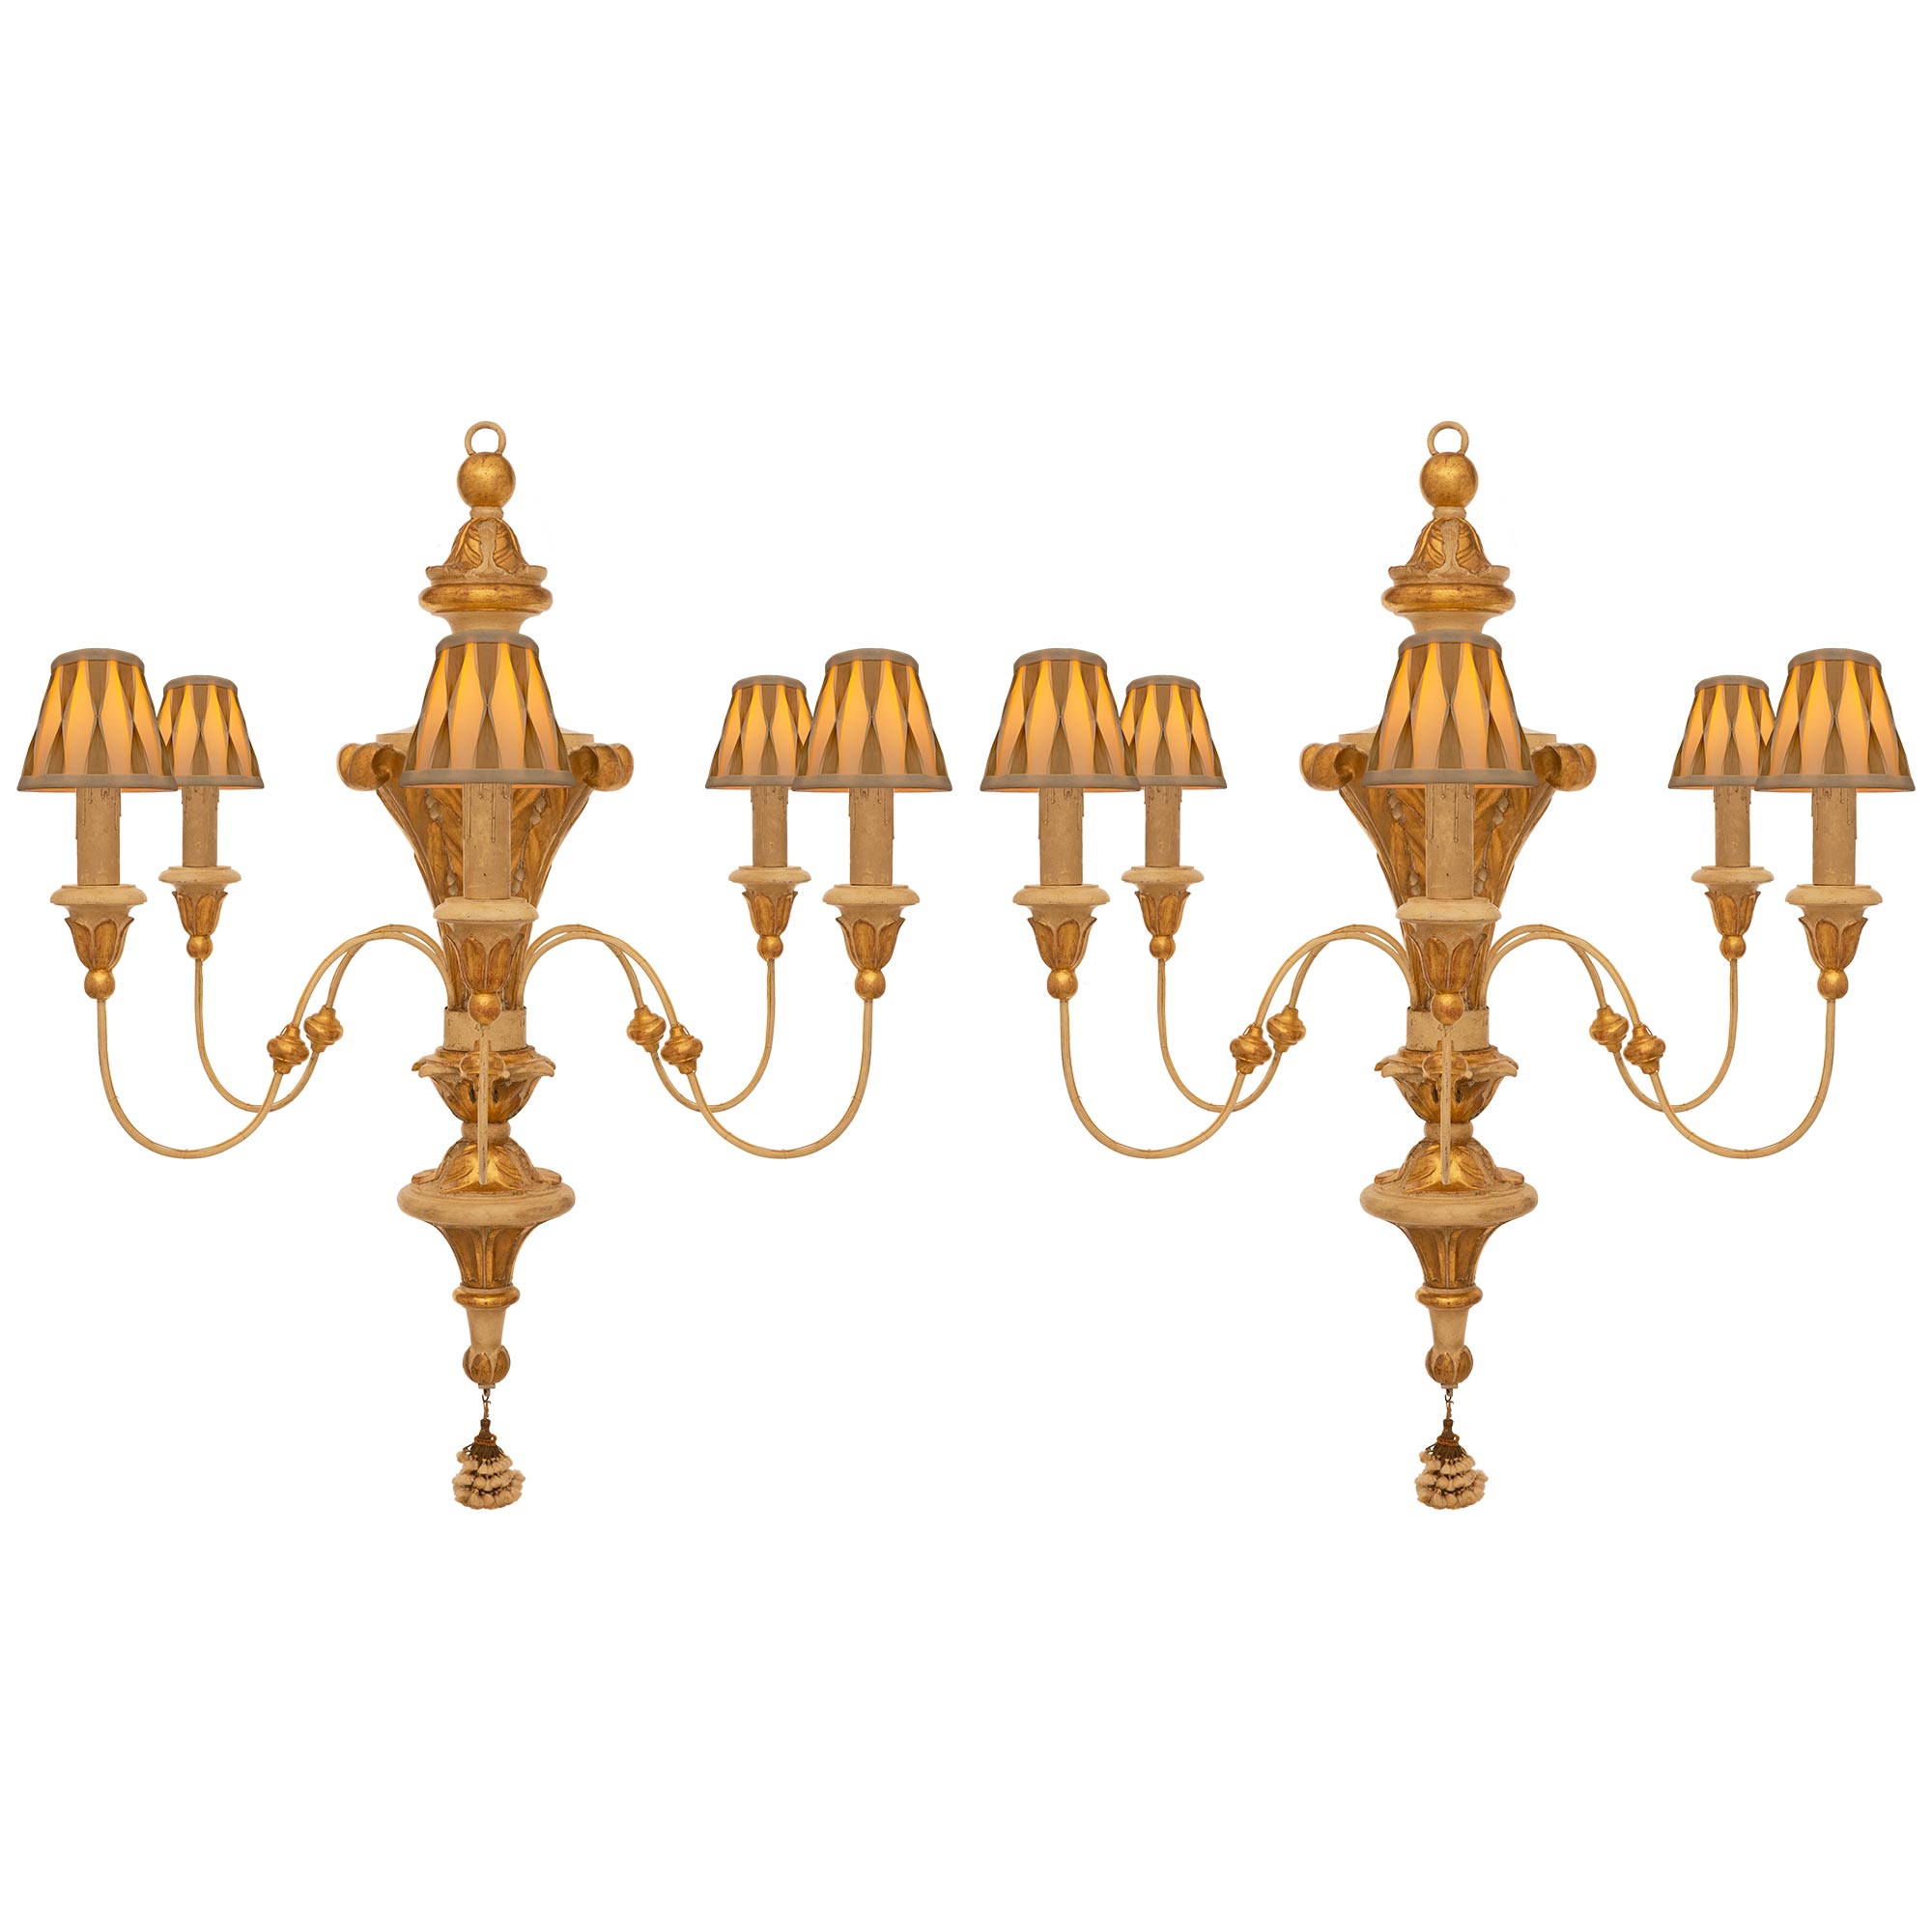 Pair Of Italian 17th Century Louis XIV Period Giltwood Chandeliers